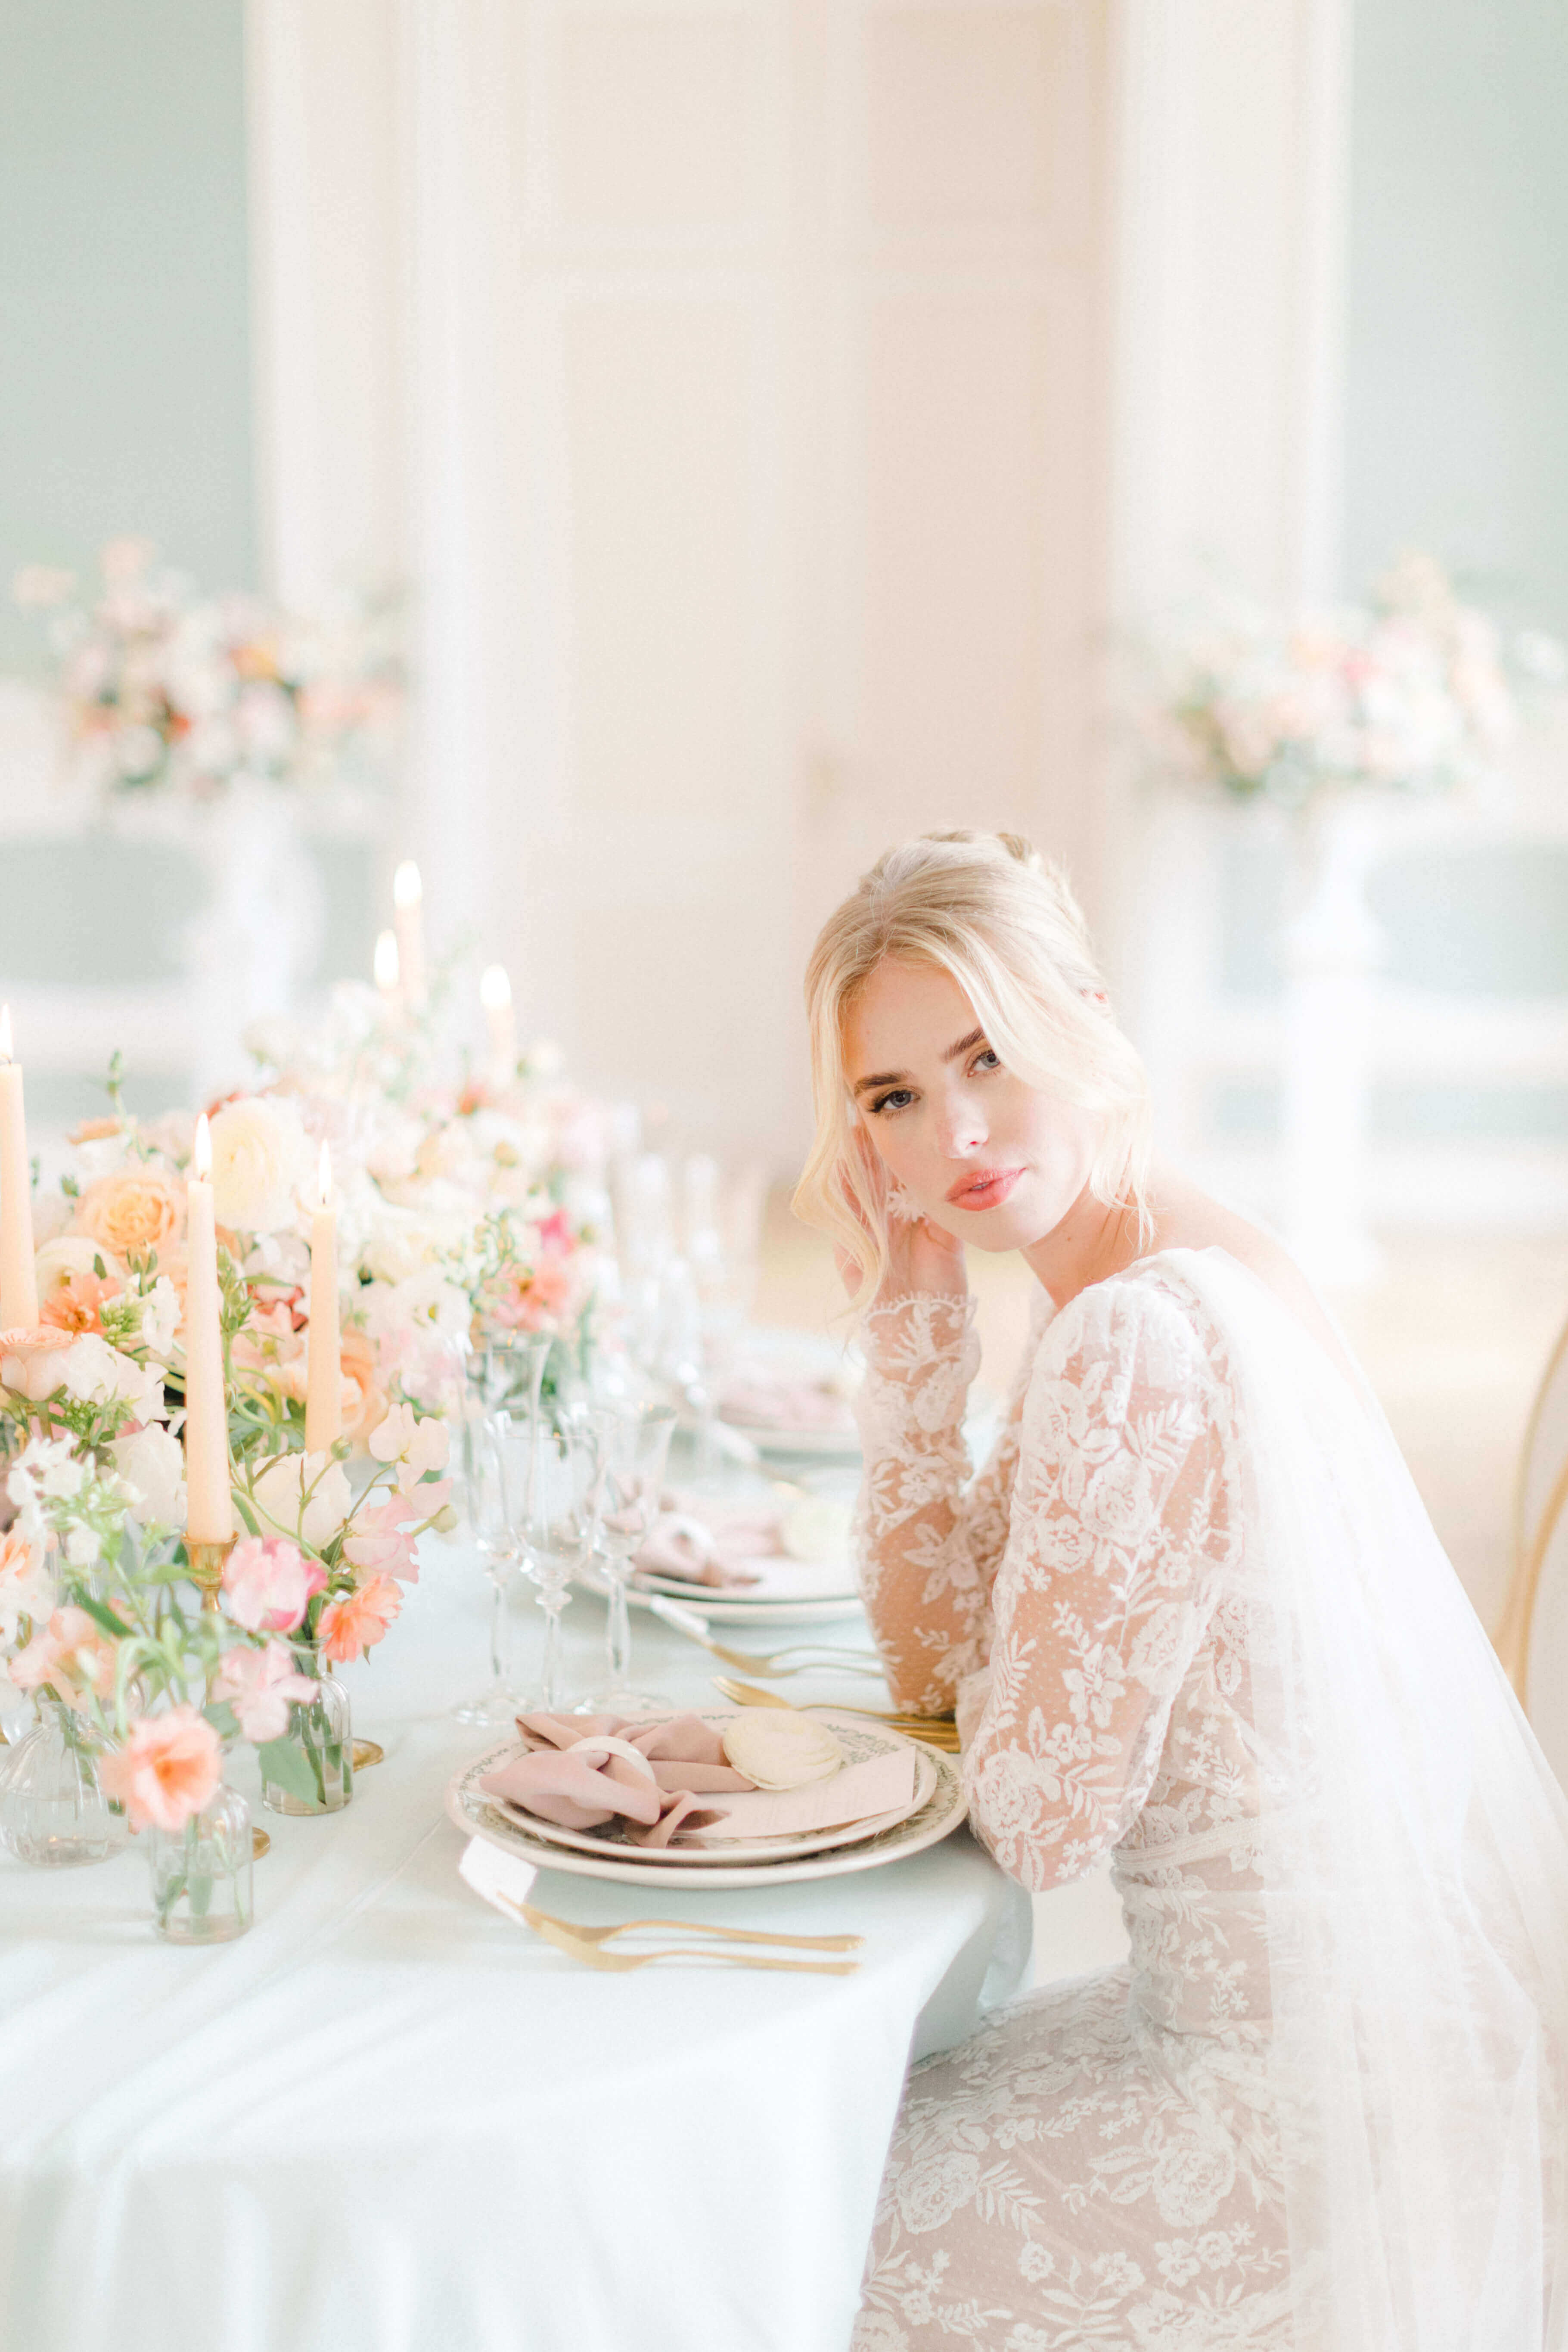 Bride sitting at pastel wedding reception table. The bride's hair is tied in a high bun and she's wearing a low cut decoletté lace dress with long sleeves. the table linen is mint and there are crystal glassware, white and green porcelain tableware, golden cutlery, pink, peach, cream pastel hues of floral centrepieces and light peach tapered candles.